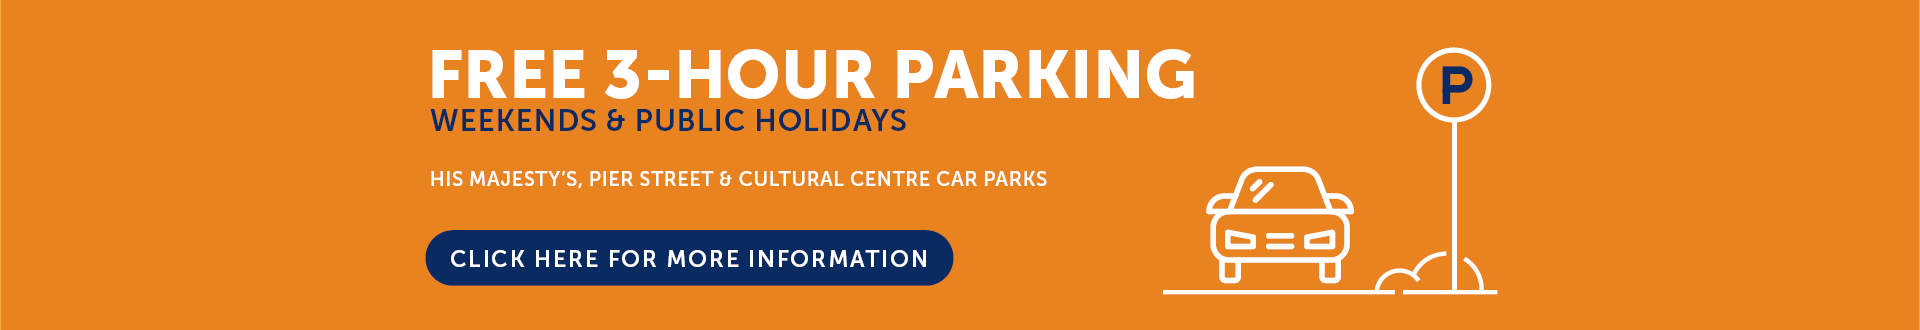 3-hour free parking on weekends & public holidays